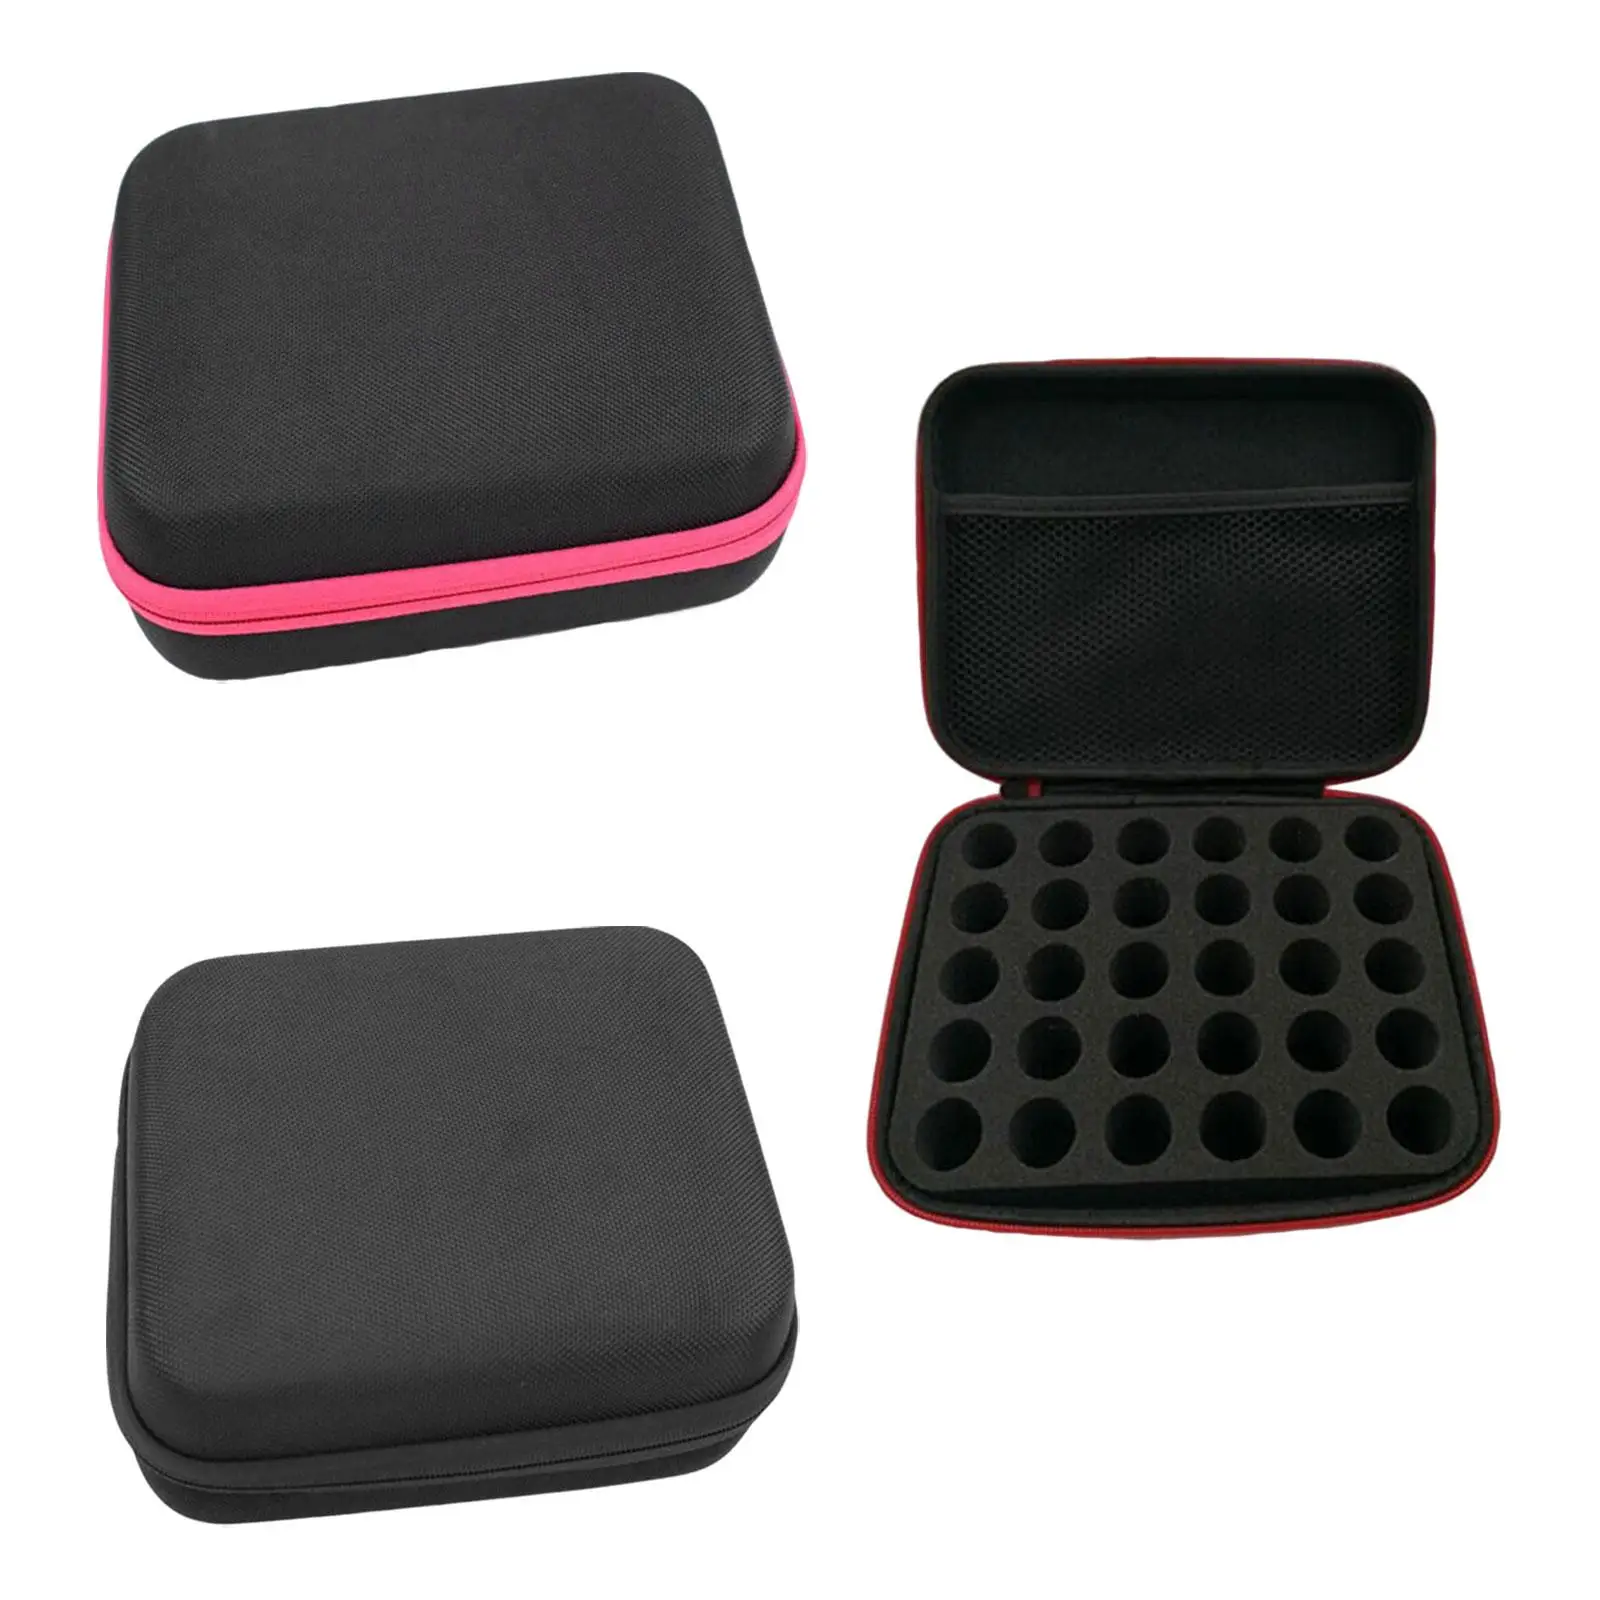 Essential Oil Carrying Case EVA Waterproof Durable Nail Polish Storage Bag for Travel